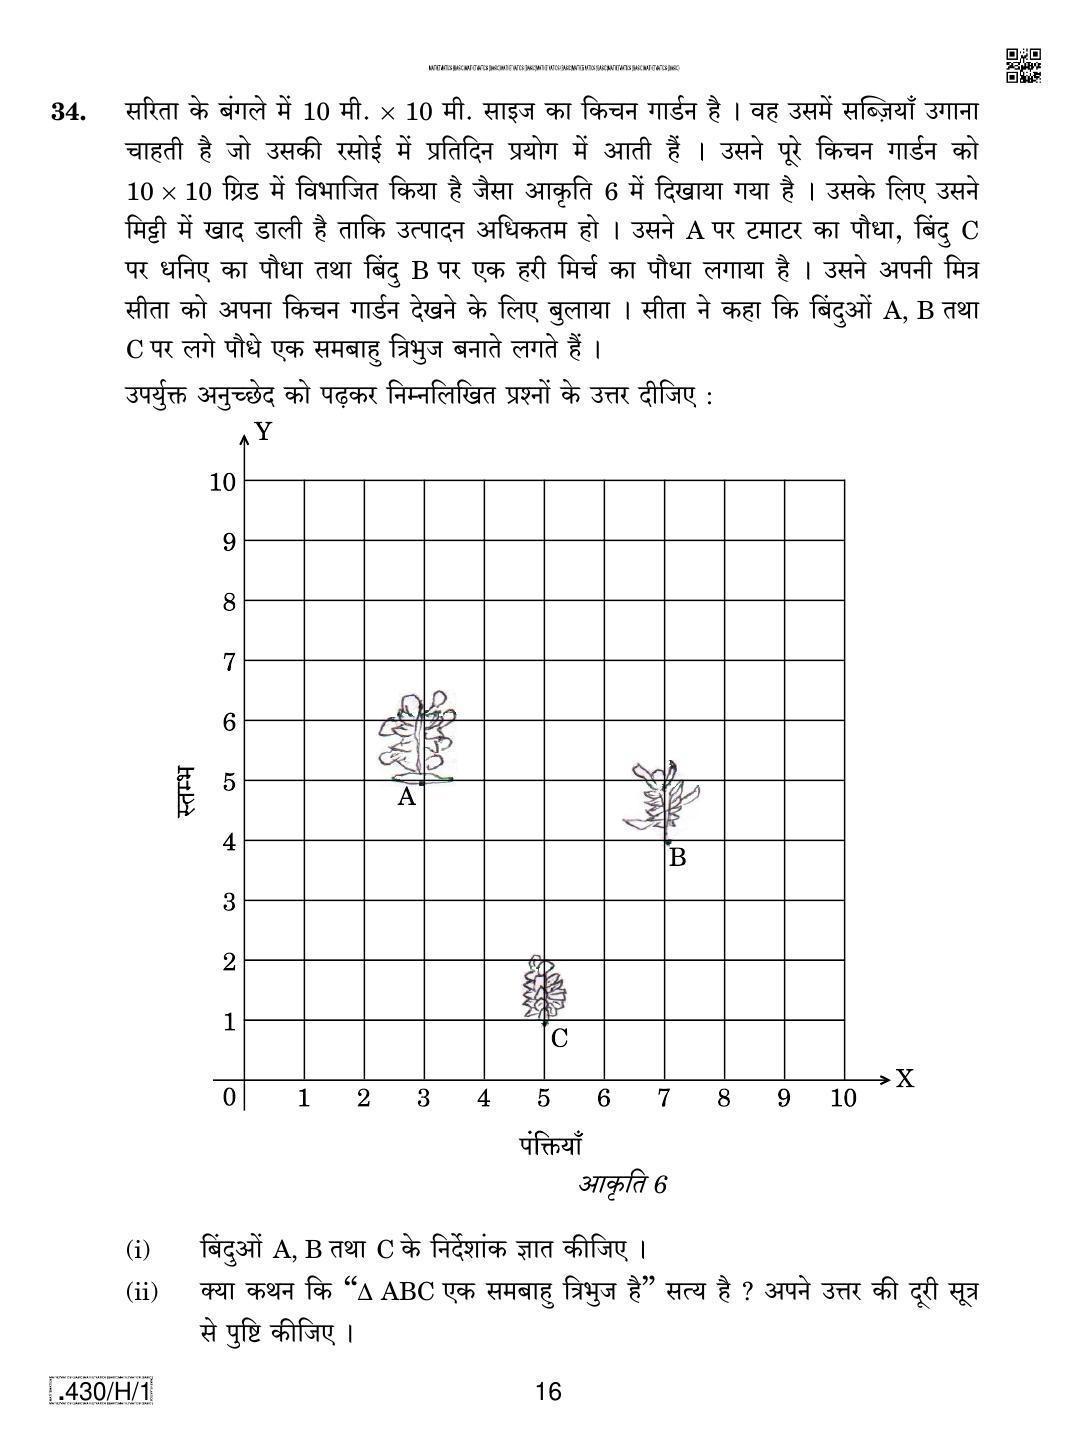 CBSE Class 10 430-C-1 - Maths (Basic) 2020 Compartment Question Paper - Page 16